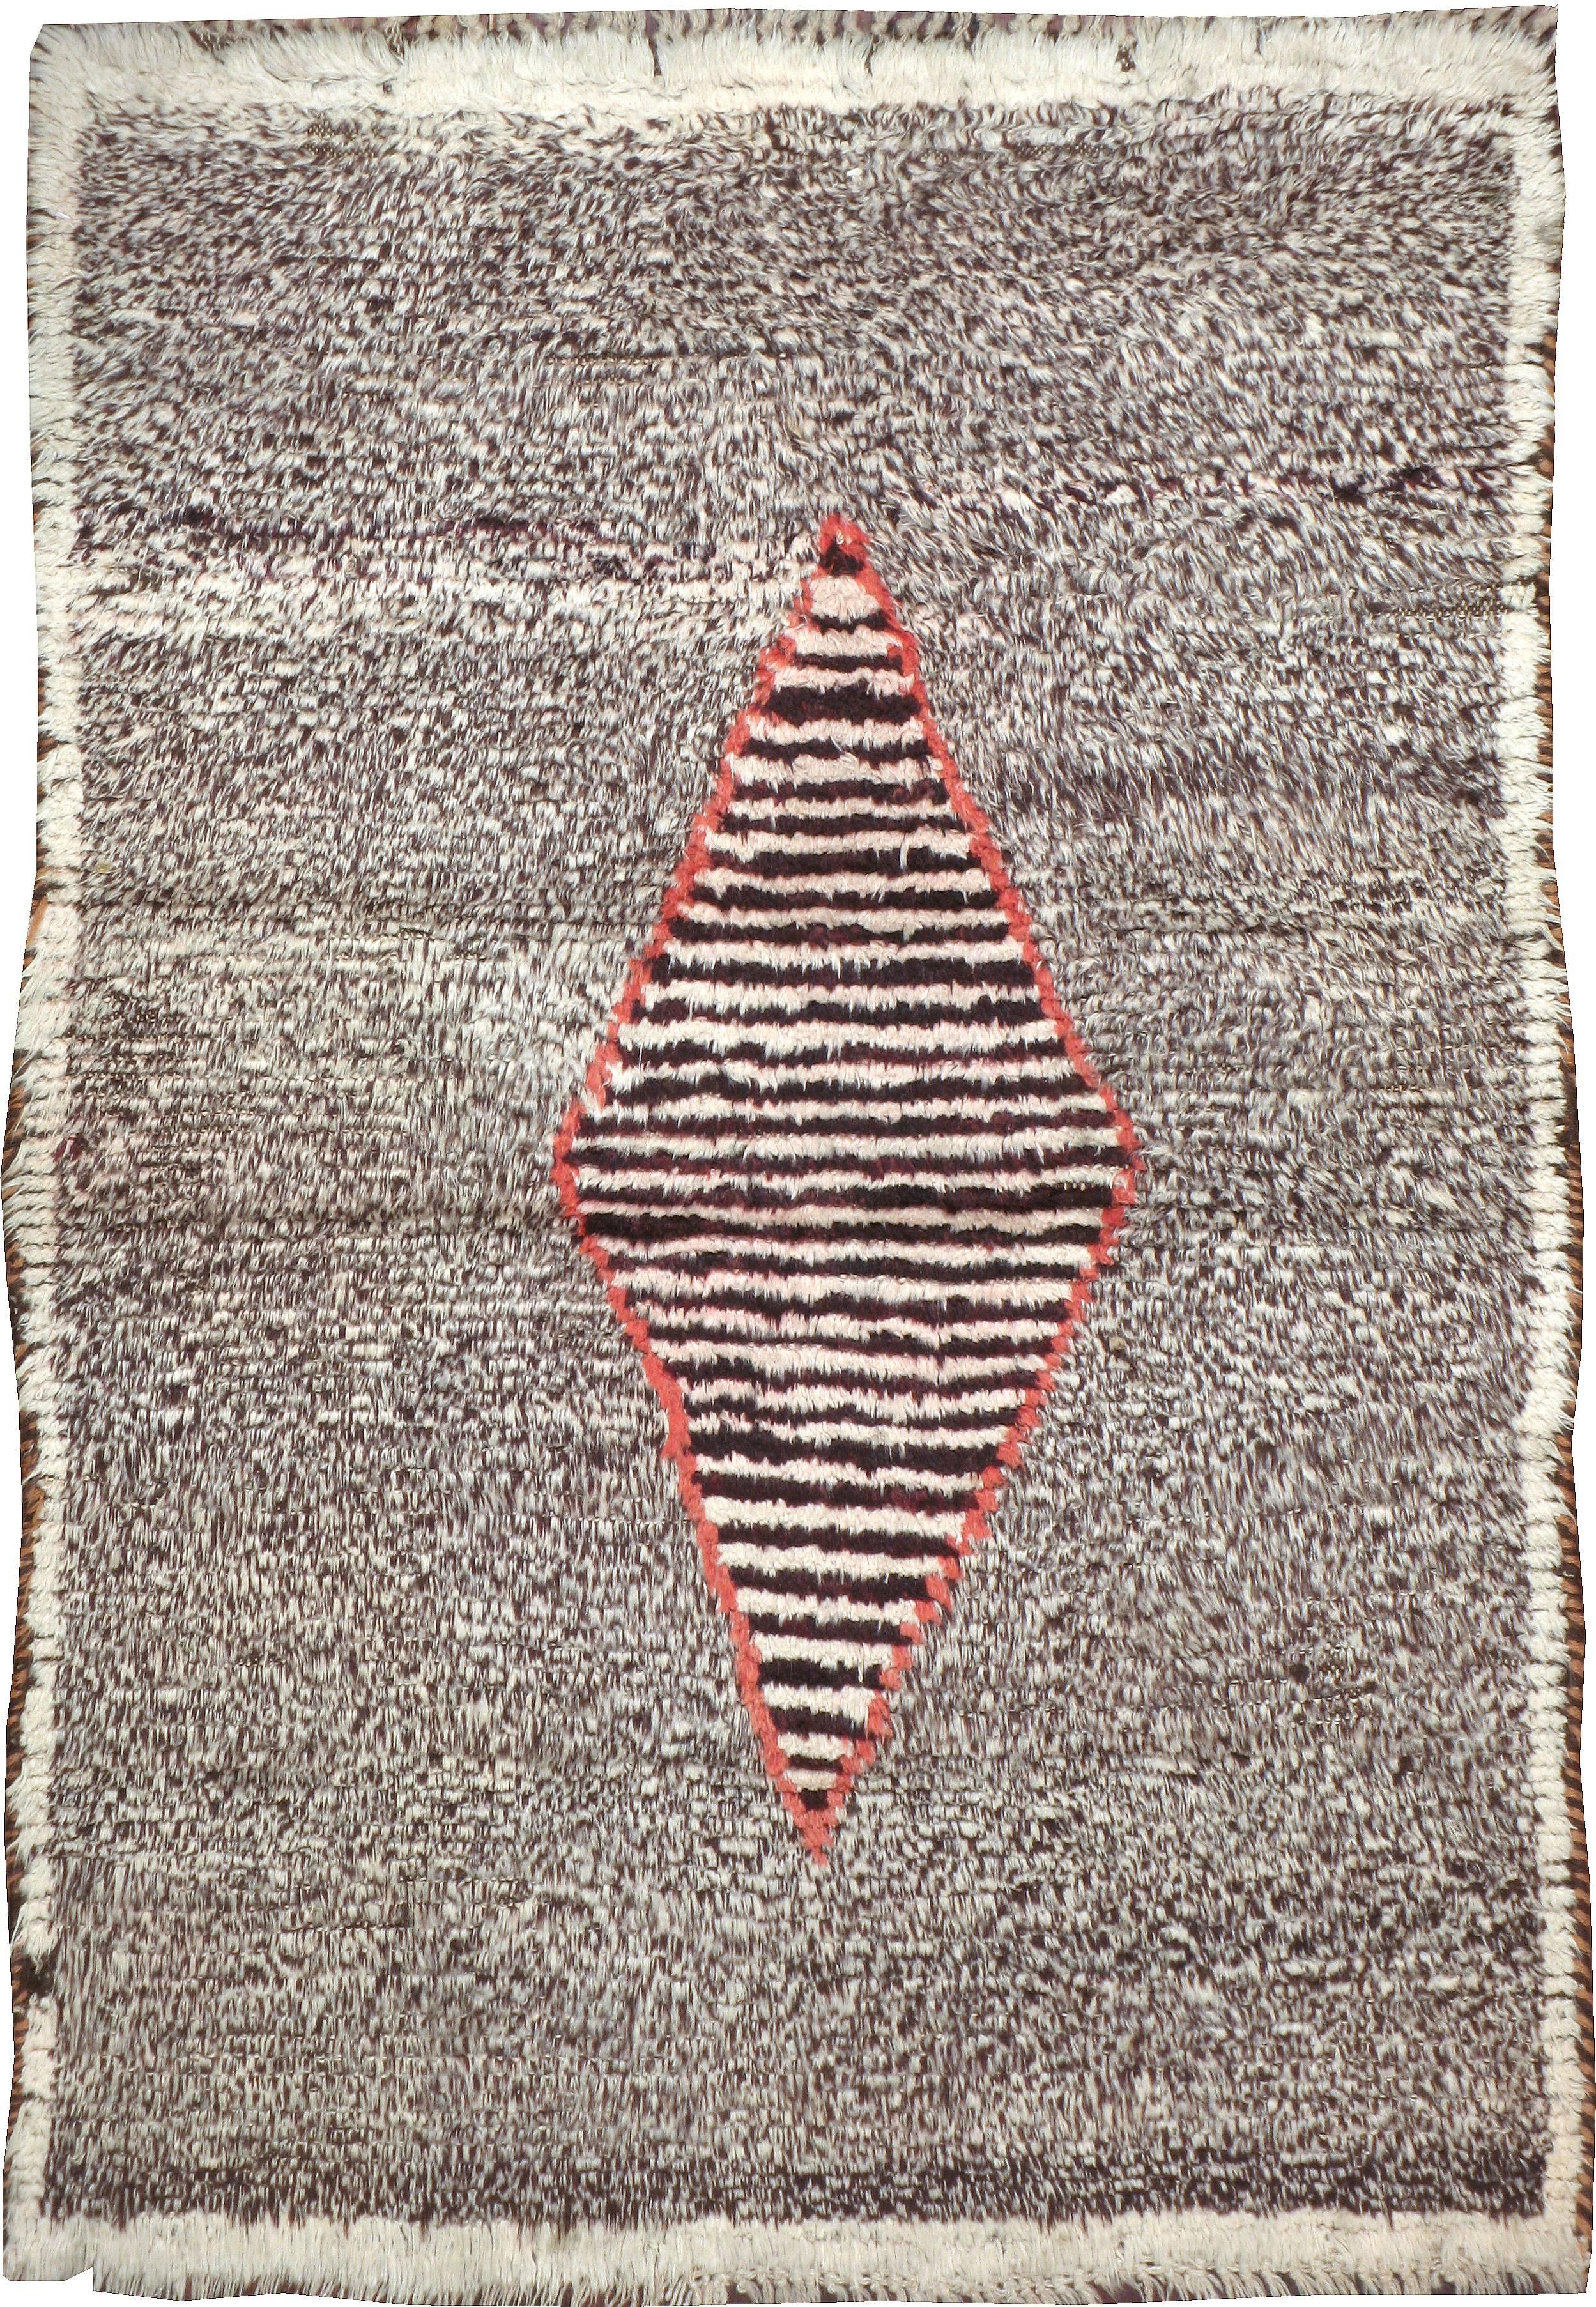 A vintage Persian Gabbeh carpet from the second quarter of the 20th century.